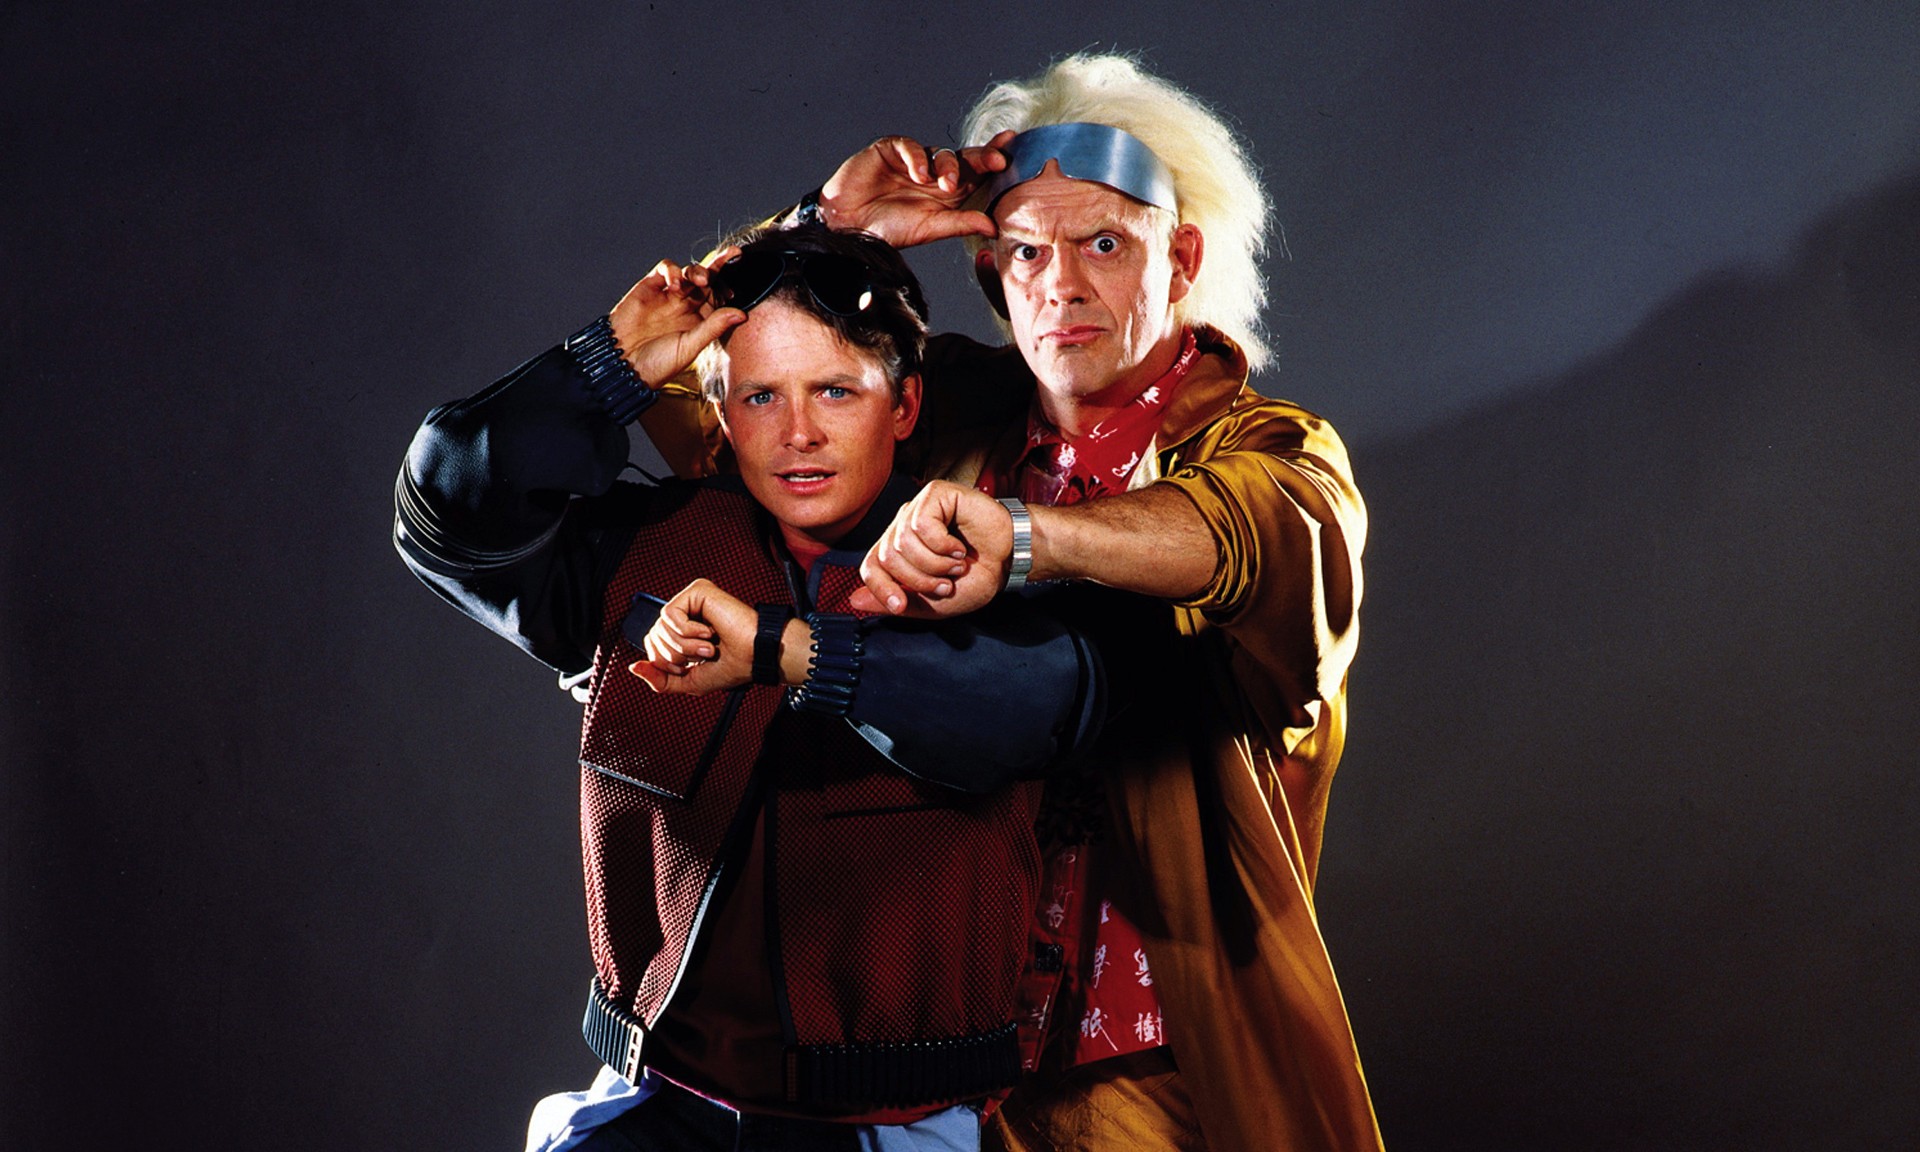 People 1920x1152 Michael J. Fox Christopher Lloyd Back to the Future Marty McFly humor movies actor men